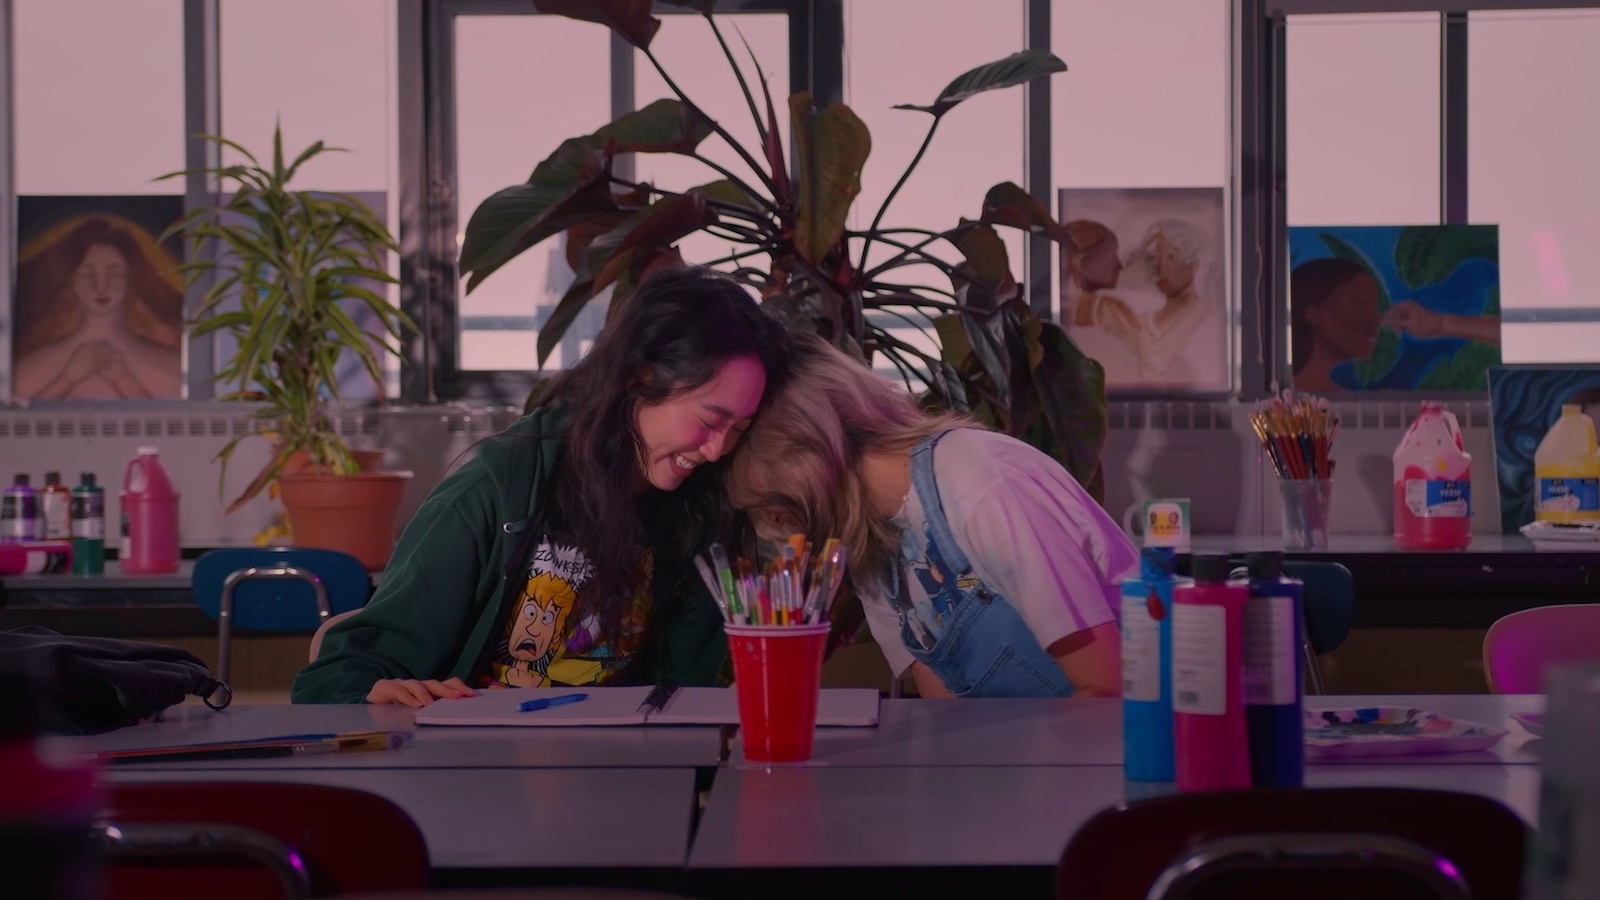 Two friends smile and laugh while sitting in a school room in front of a craft table, their heads on each other's shoulders